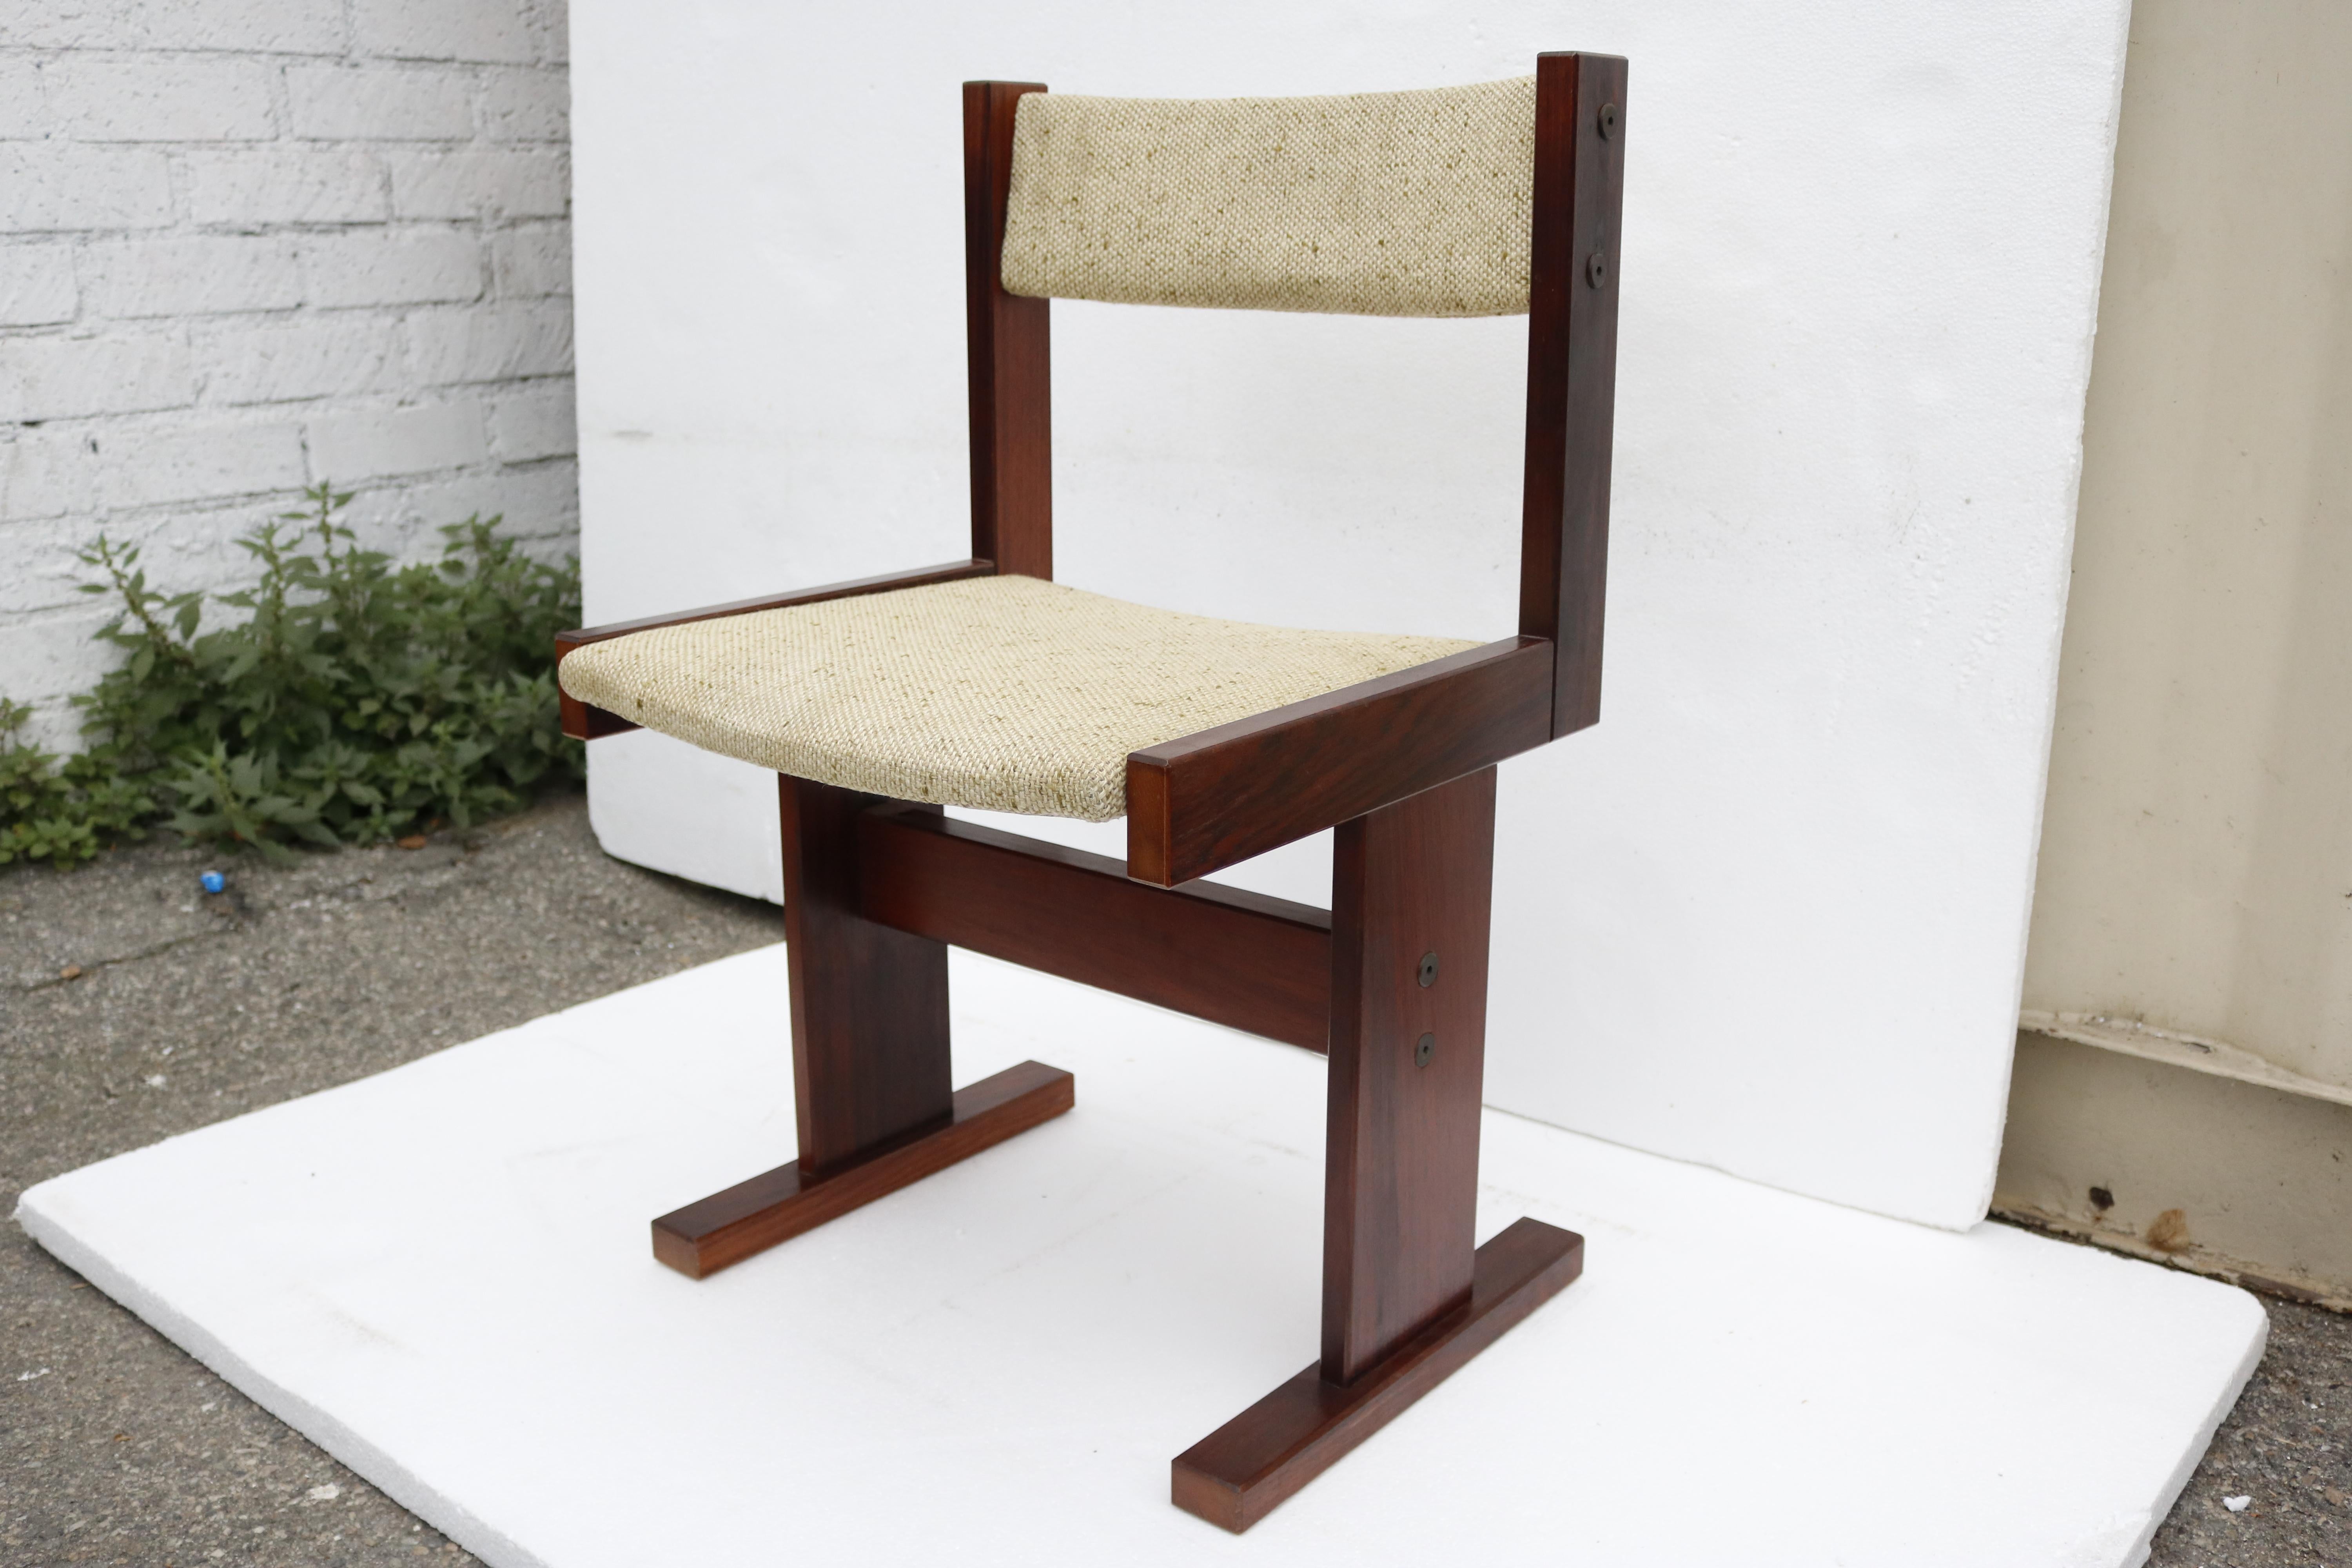 6 sturdy Danish dining chairs made of teak.
The price is for the set.